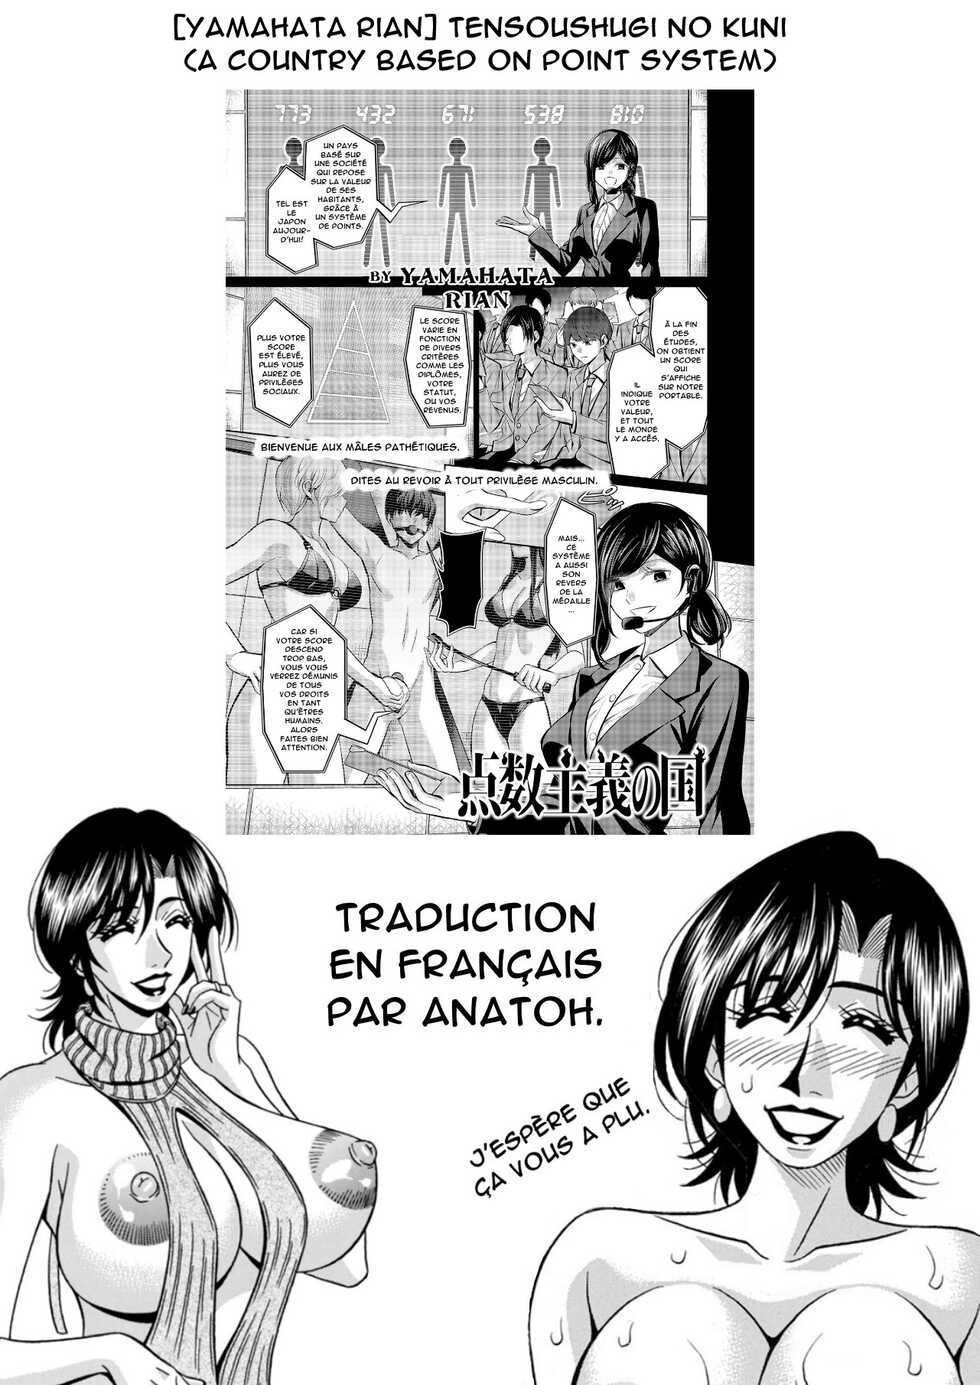 [Yamahata Rian] Tensuushugi no Kuni | A Country Based on Point System (Girls forM Vol. 20) [French] [Anatoh] [Digital] - Page 35